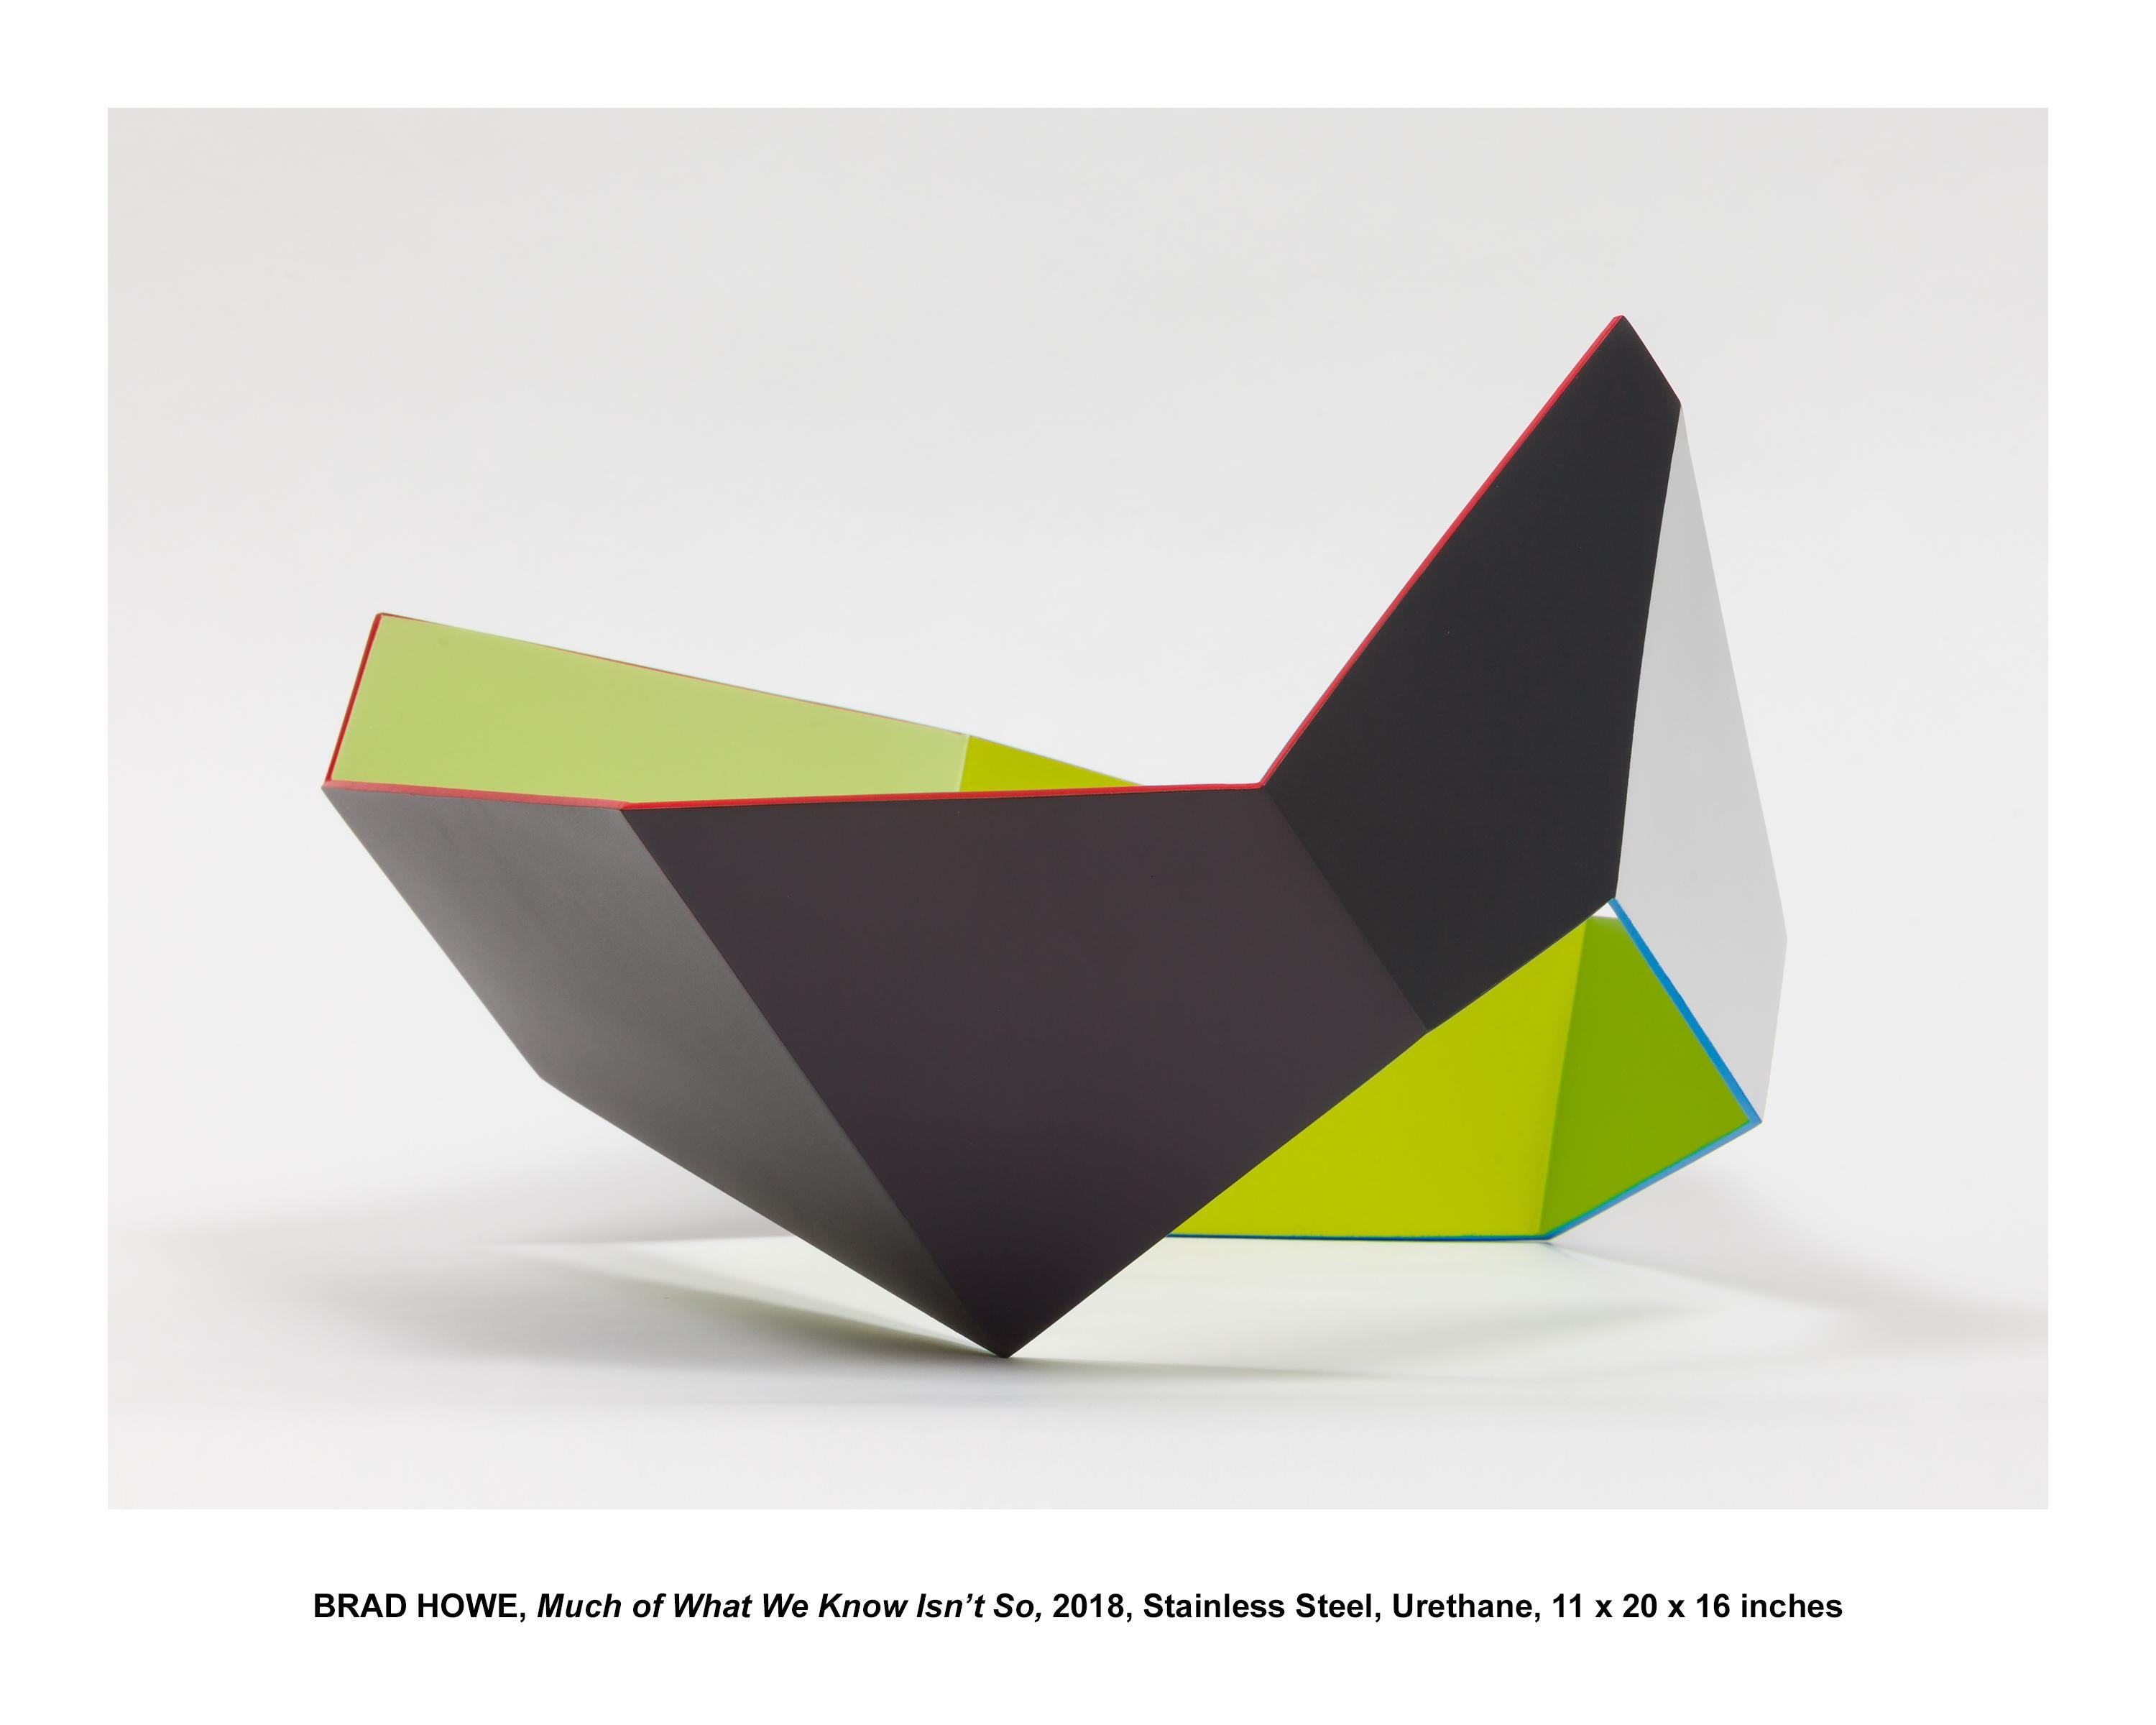 This unique, one of a kind contemporary, geometric, minimalistic sculpture by Brad Howe, is constructed of stainless steel and coated in polyurethane.

Howe’s colourful and angular work continues to connect with international communities, exhibiting